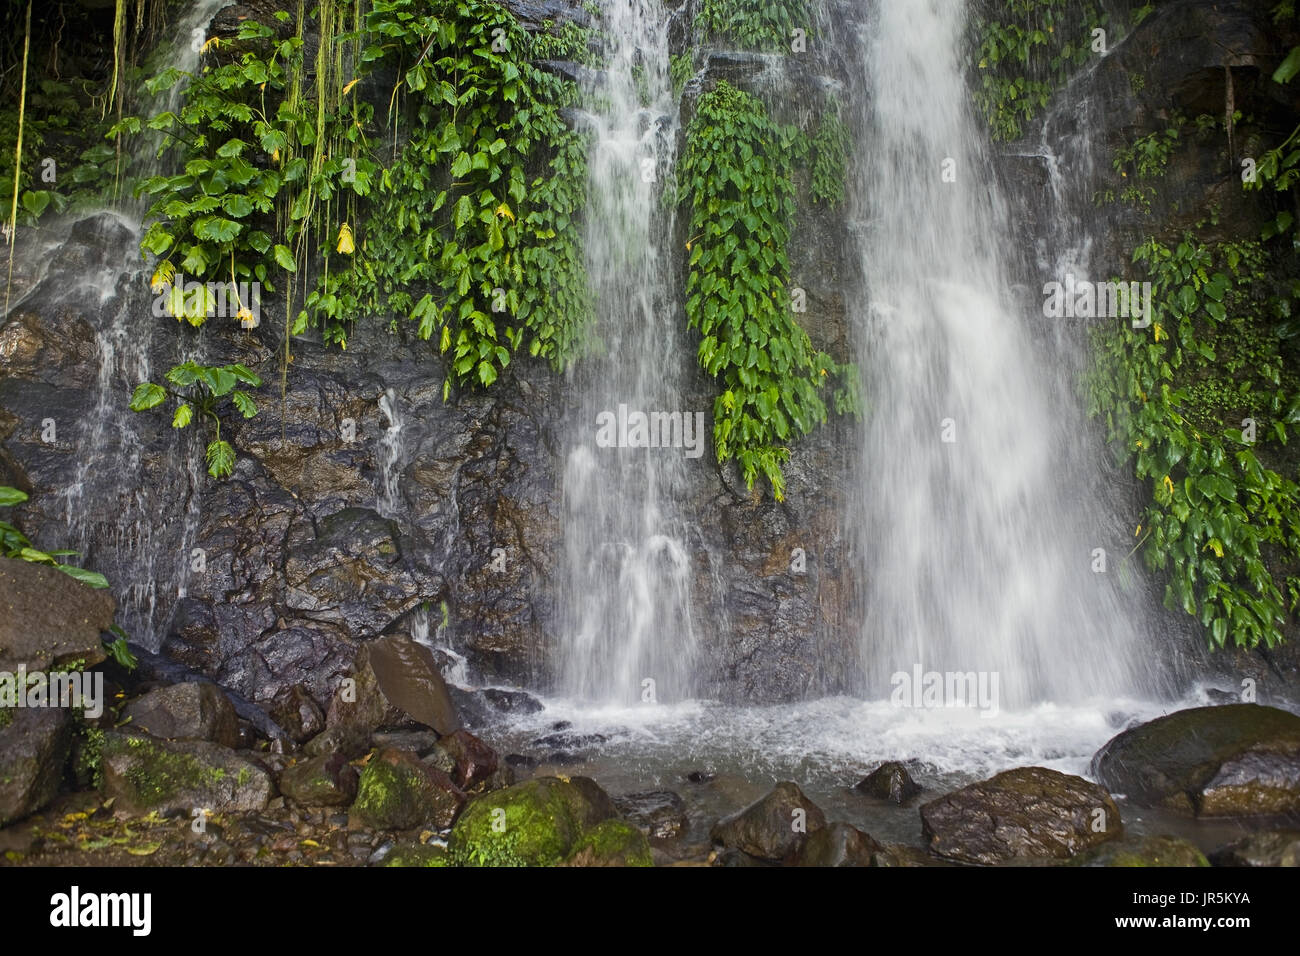 Twin waterfall cascading down a rocky cliffside covered with tropical, green vegetation. Stock Photo